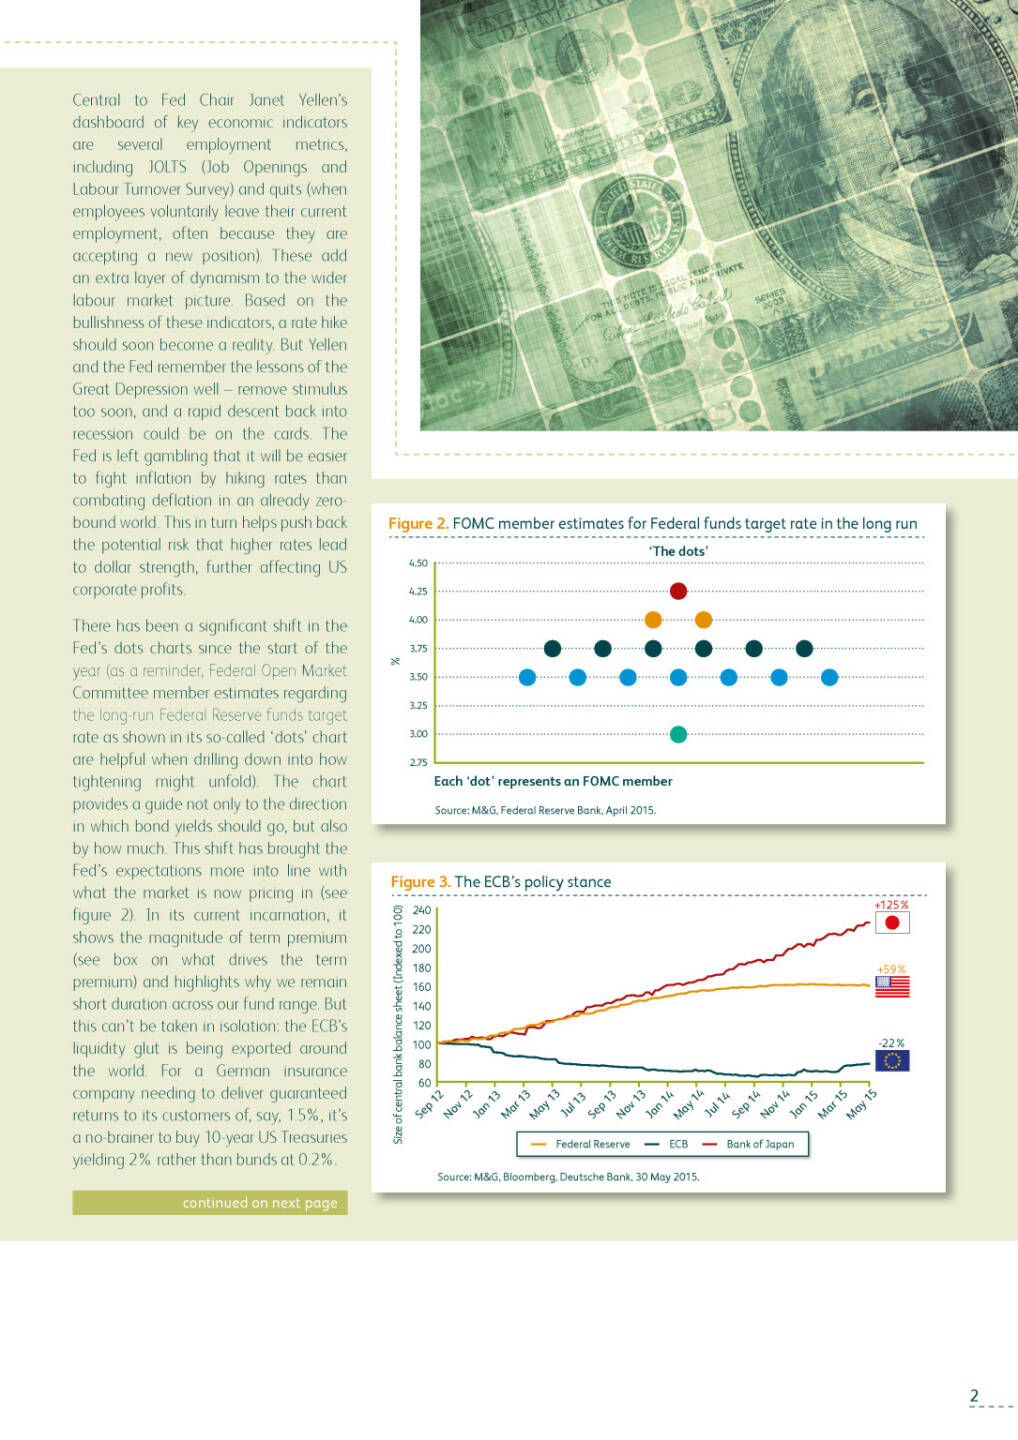 M&G Panoramic Outlook, Seite 2/5, komplettes Dokument unter http://boerse-social.com/static/uploads/file_194_mg_panoramic_outlook.pdf